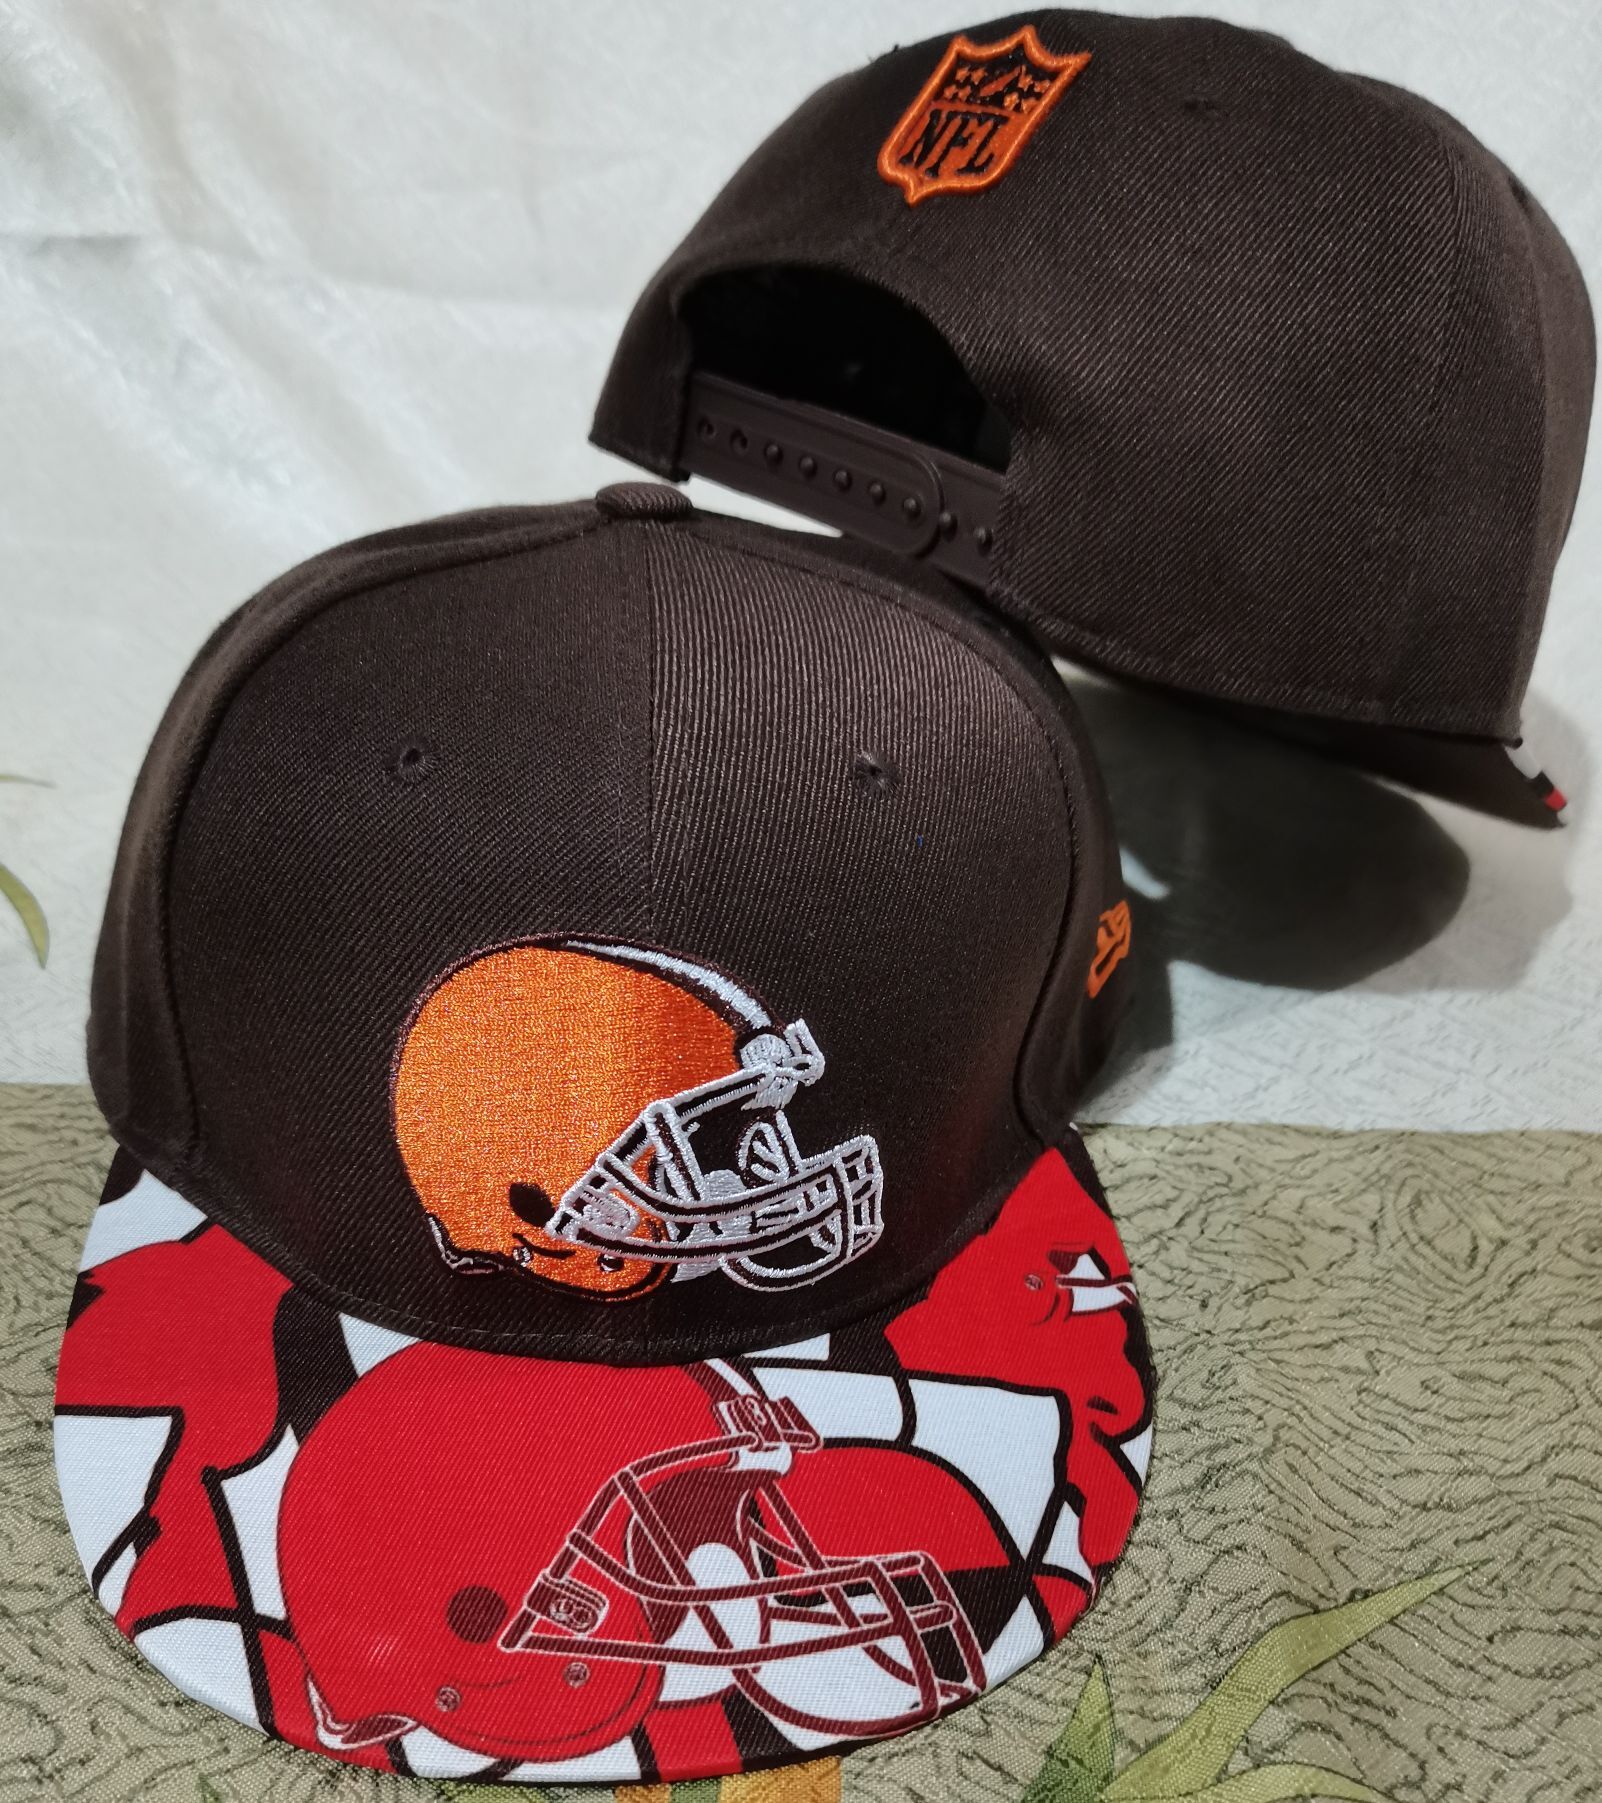 2022 NFL Cleveland Browns hat GSMY->nfl hats->Sports Caps